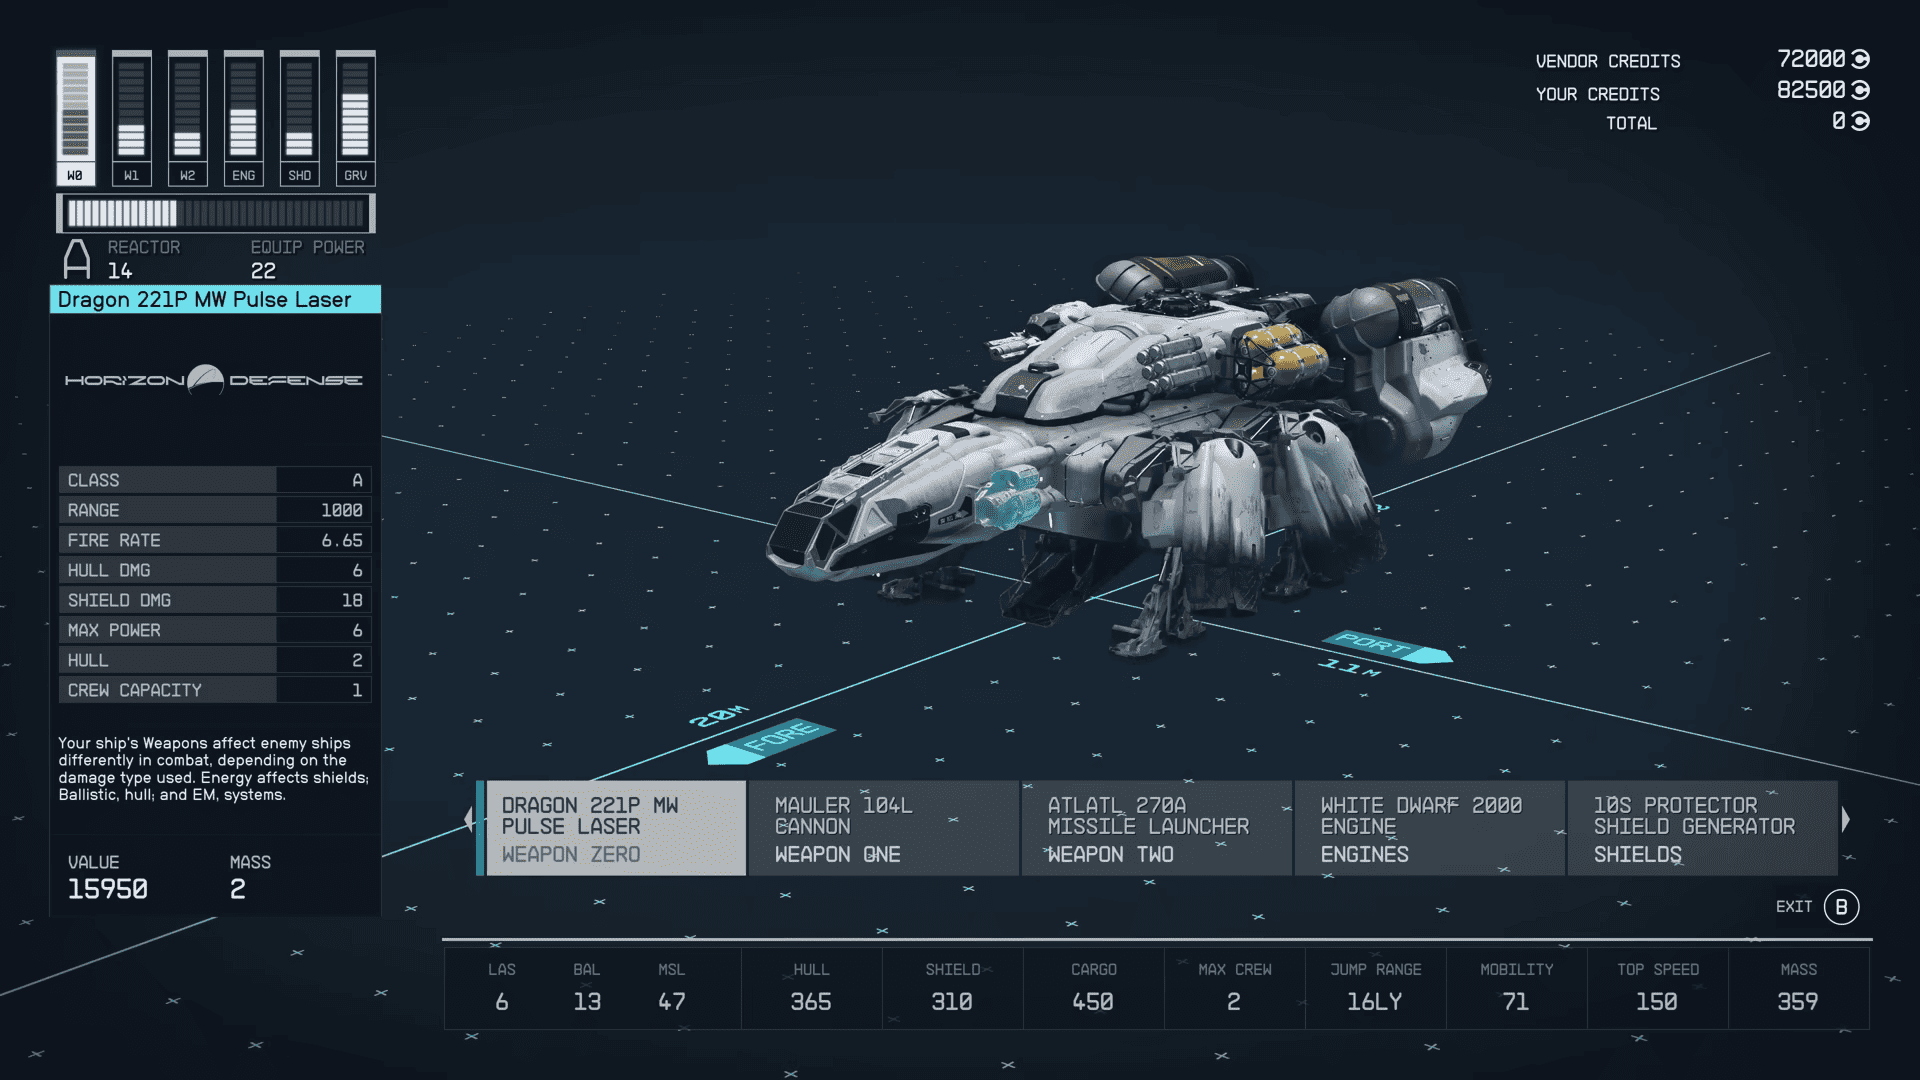 Starfield starship weapons: The ship customisation menu showing the equipped weapons, engines, and shields.